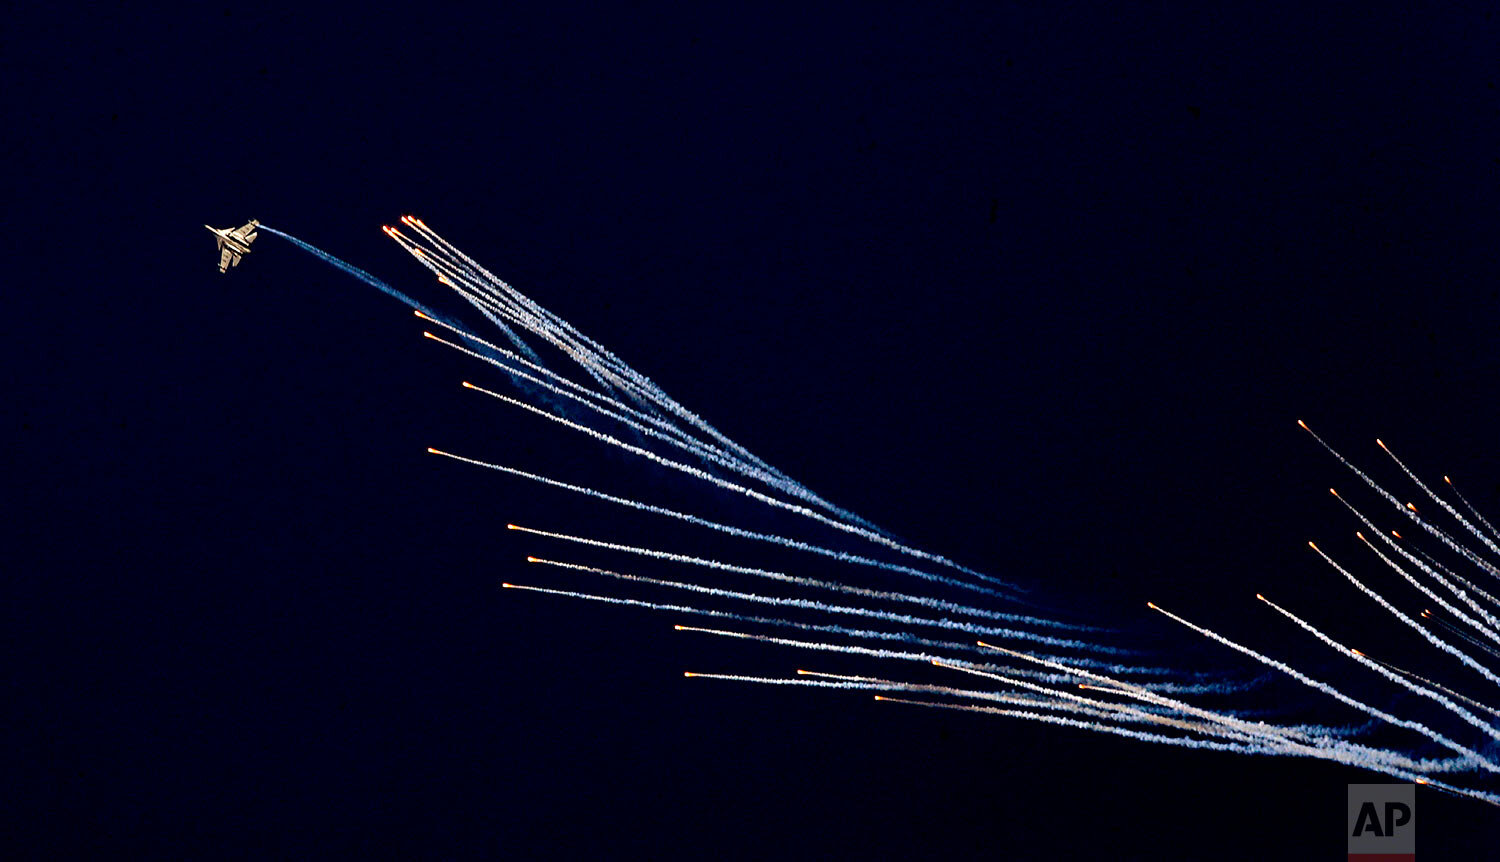  An Indian Air Force fighter aircraft Sukhoi Su-30 fires flares during Air Force Day parade at Hindon Air Force Station on the outskirts of New Delhi, India, Thursday, Oct. 8, 2020. (AP Photo/Manish Swarup) 